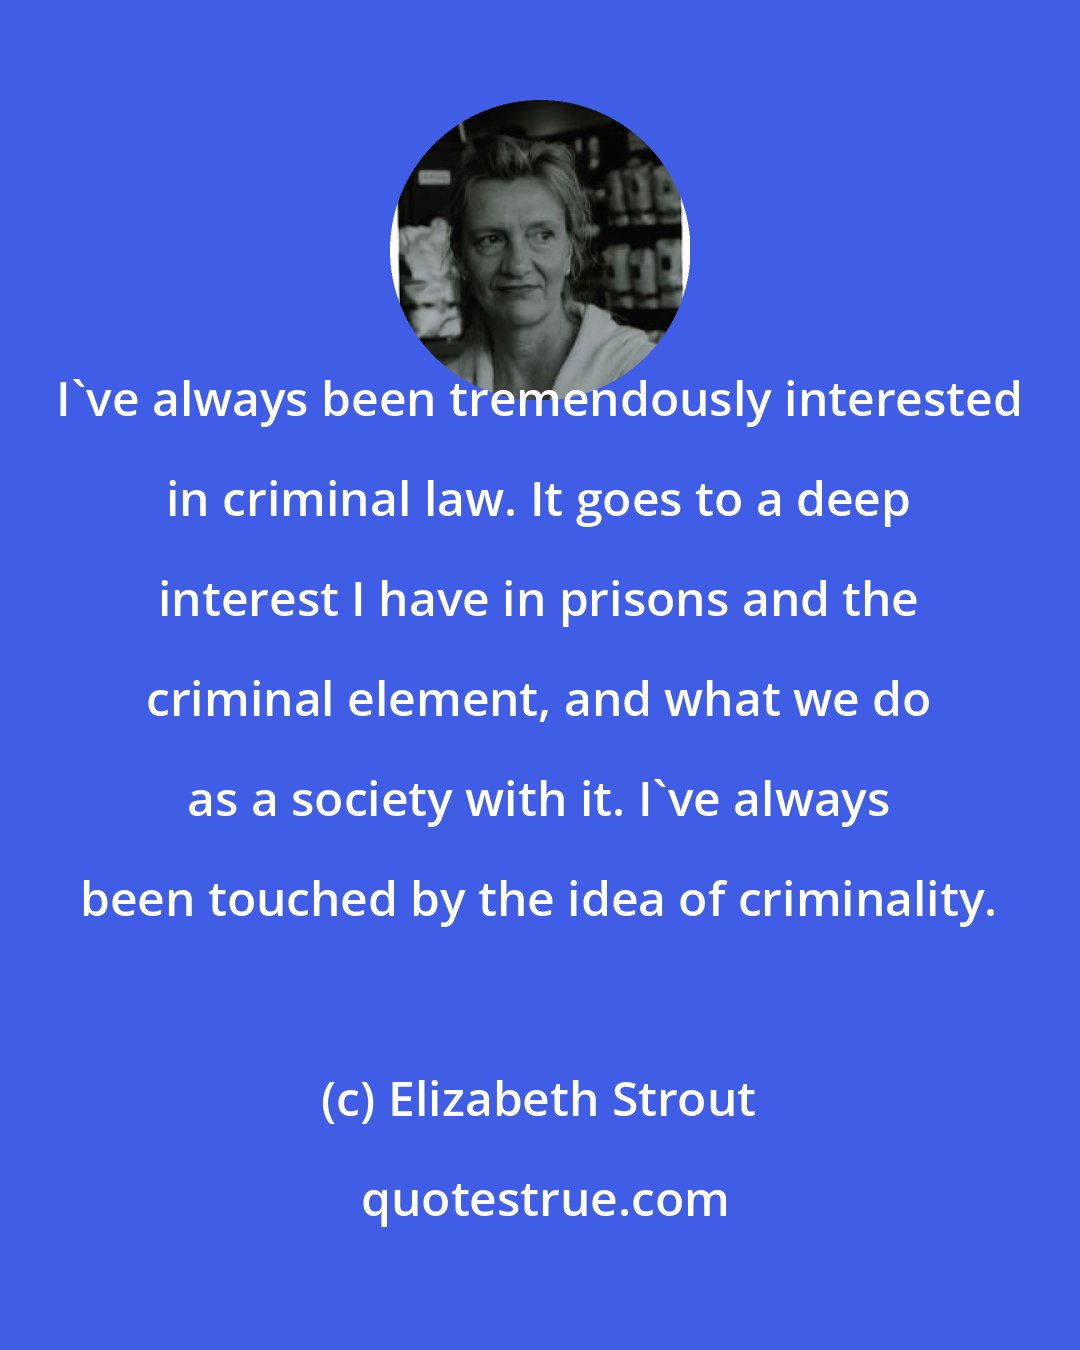 Elizabeth Strout: I've always been tremendously interested in criminal law. It goes to a deep interest I have in prisons and the criminal element, and what we do as a society with it. I've always been touched by the idea of criminality.